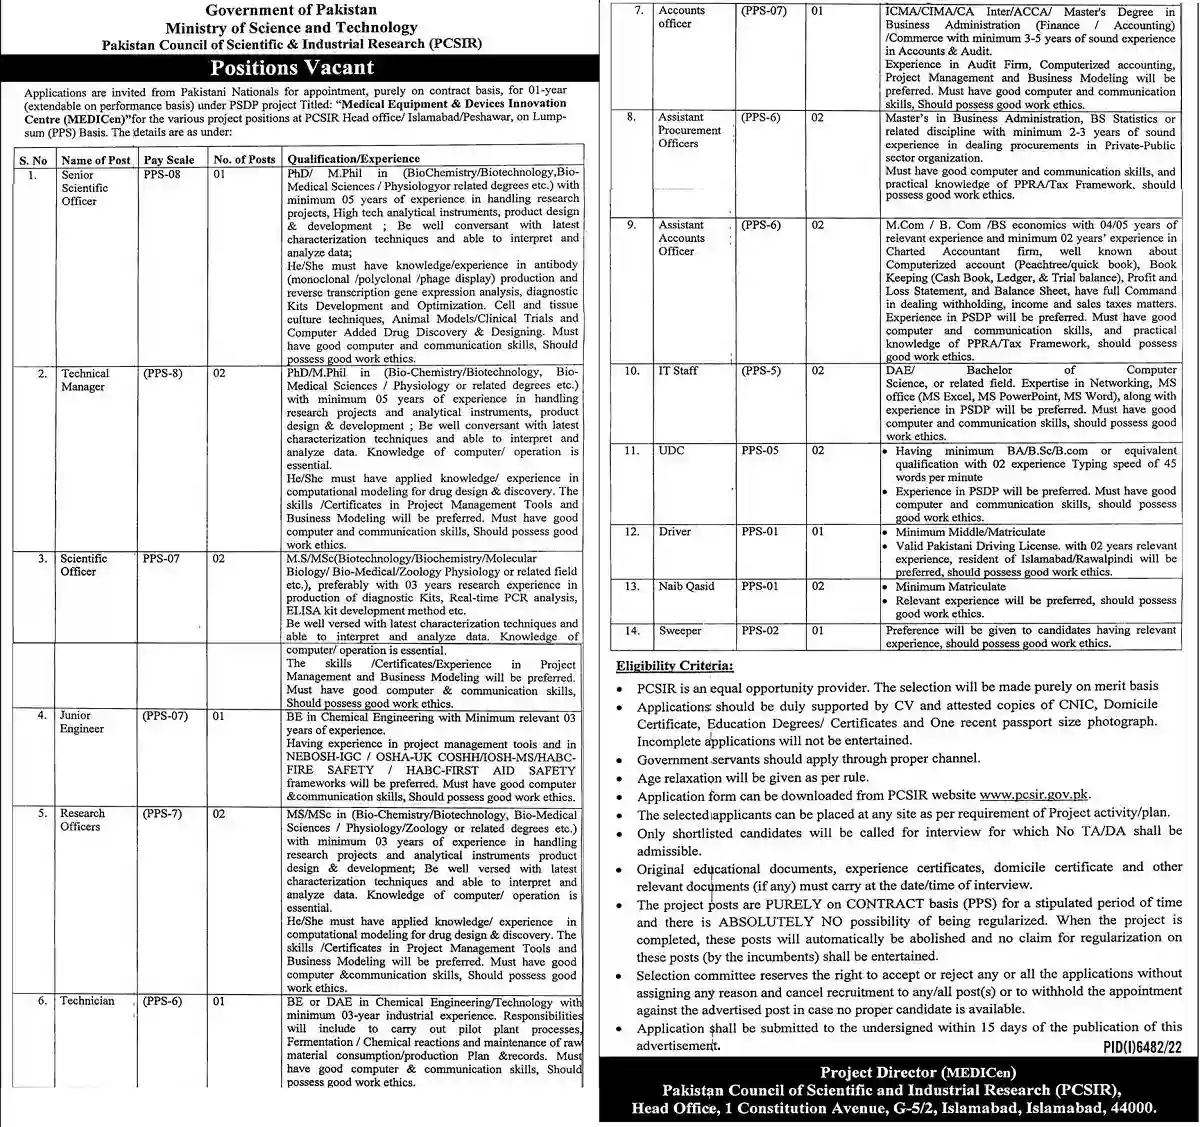 Government of Pakistan PCSIR Jobs 2023: Ministry of Science & Technology